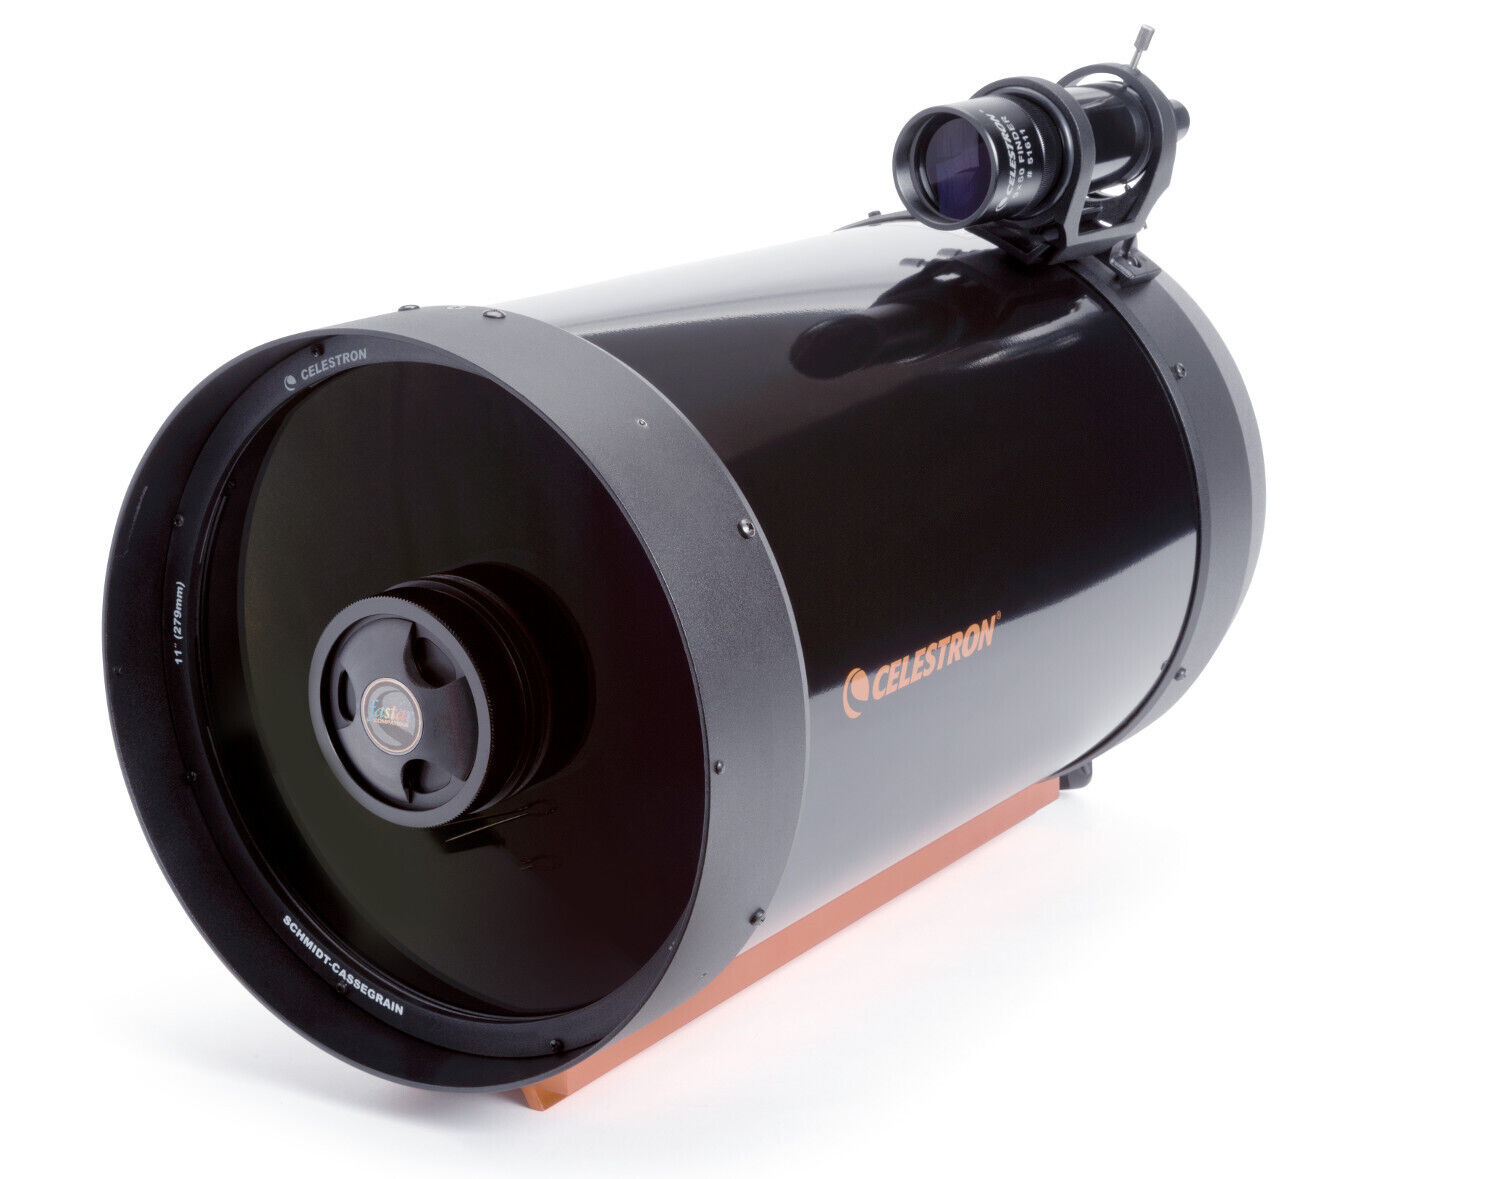 Celestron 11 SCT CGE Optical Tube Assembly